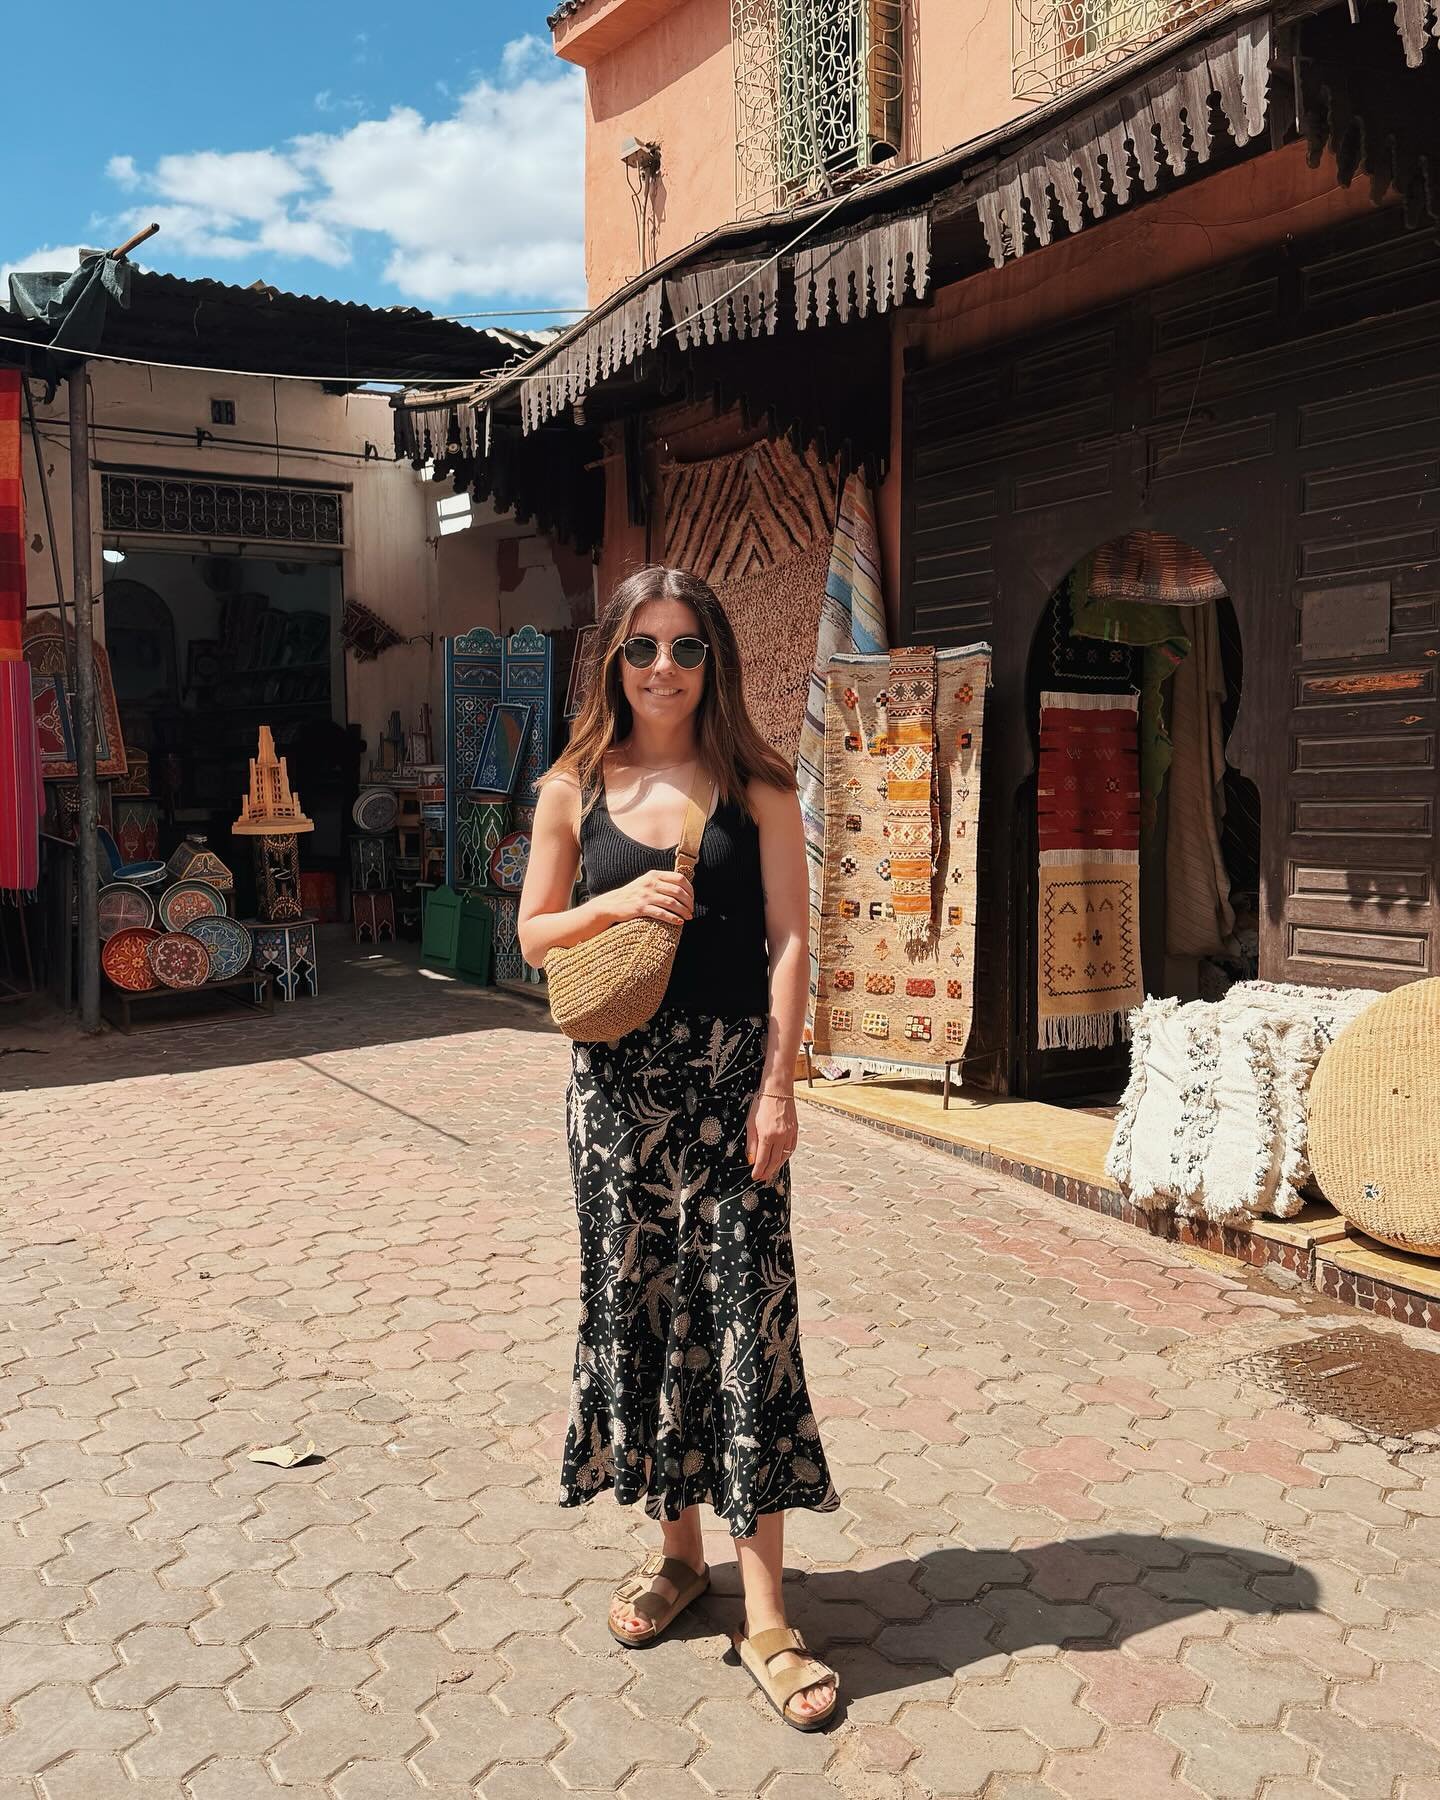 Marrakech in outfits ☀️🌵. Packed light so we could buy ALL the homewares. 6 tops, 3 trousers, 1 skirt, 2 cardigans &amp; 3 sandals got me through 5 days. Basically pack all the cream and black and rotate (my go-to again 😅)